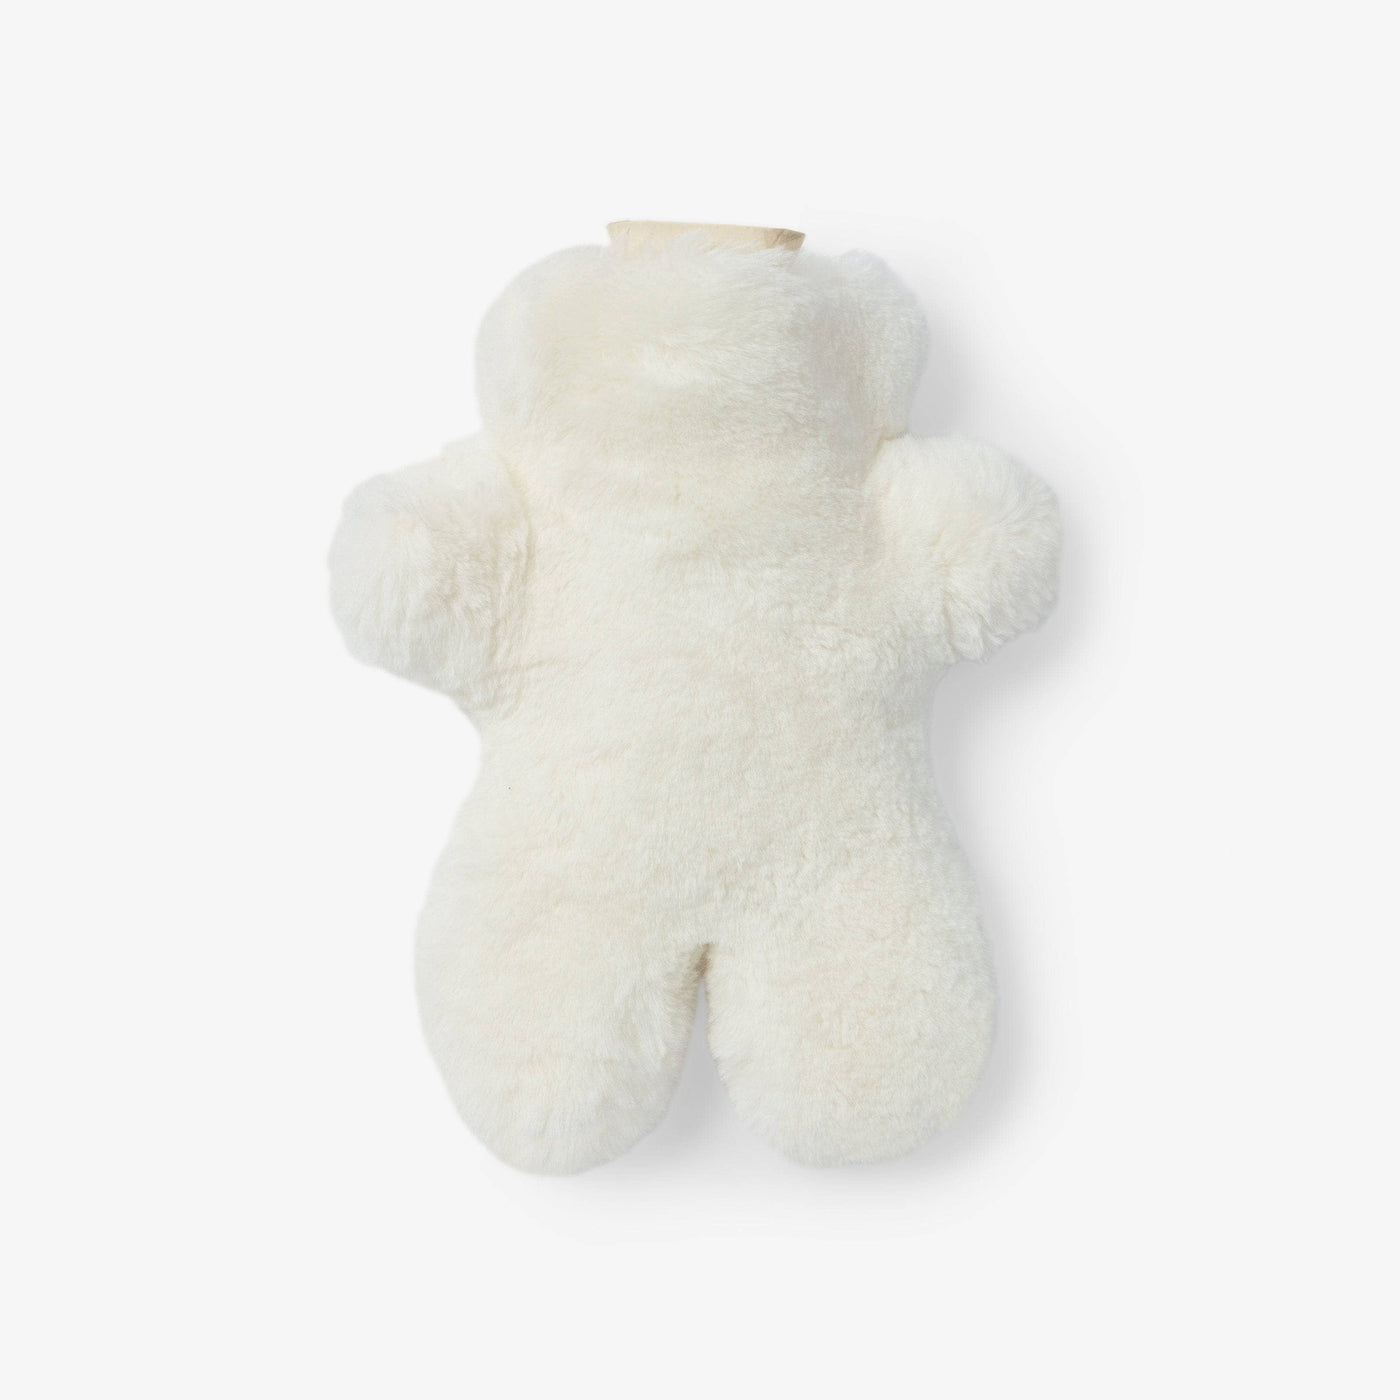 Modico Teddy Hot Water Bottle Cover, Ivory 1